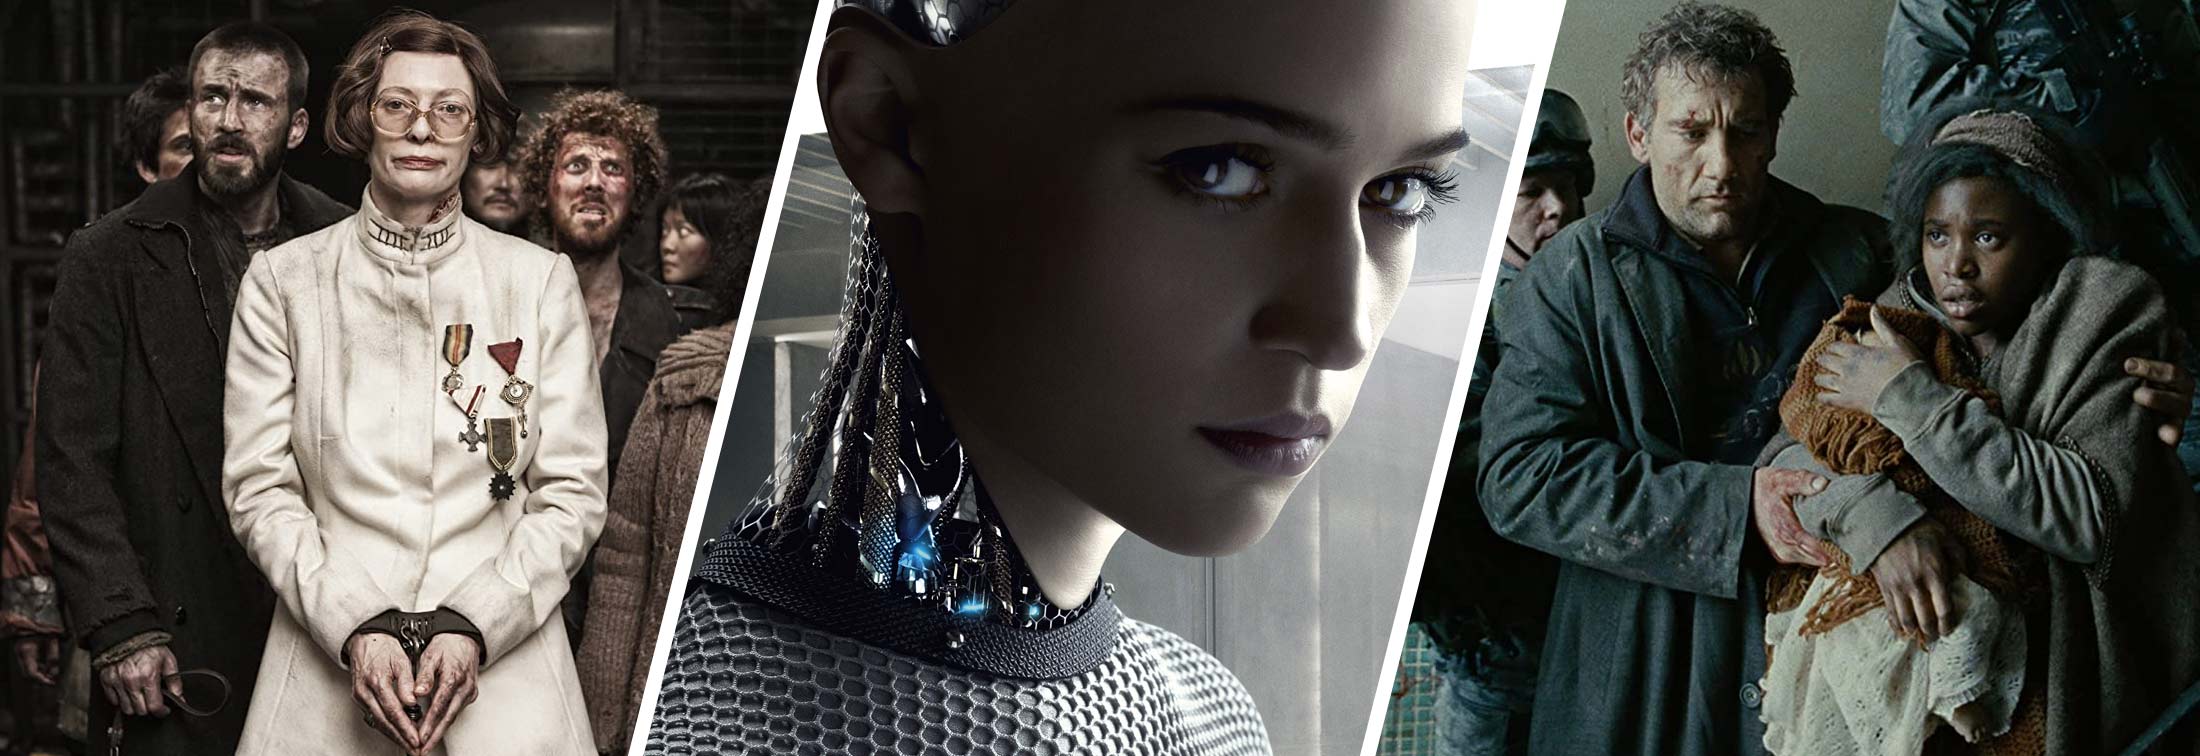 Lockdown and Catch Up - The best futuristic films streaming right now